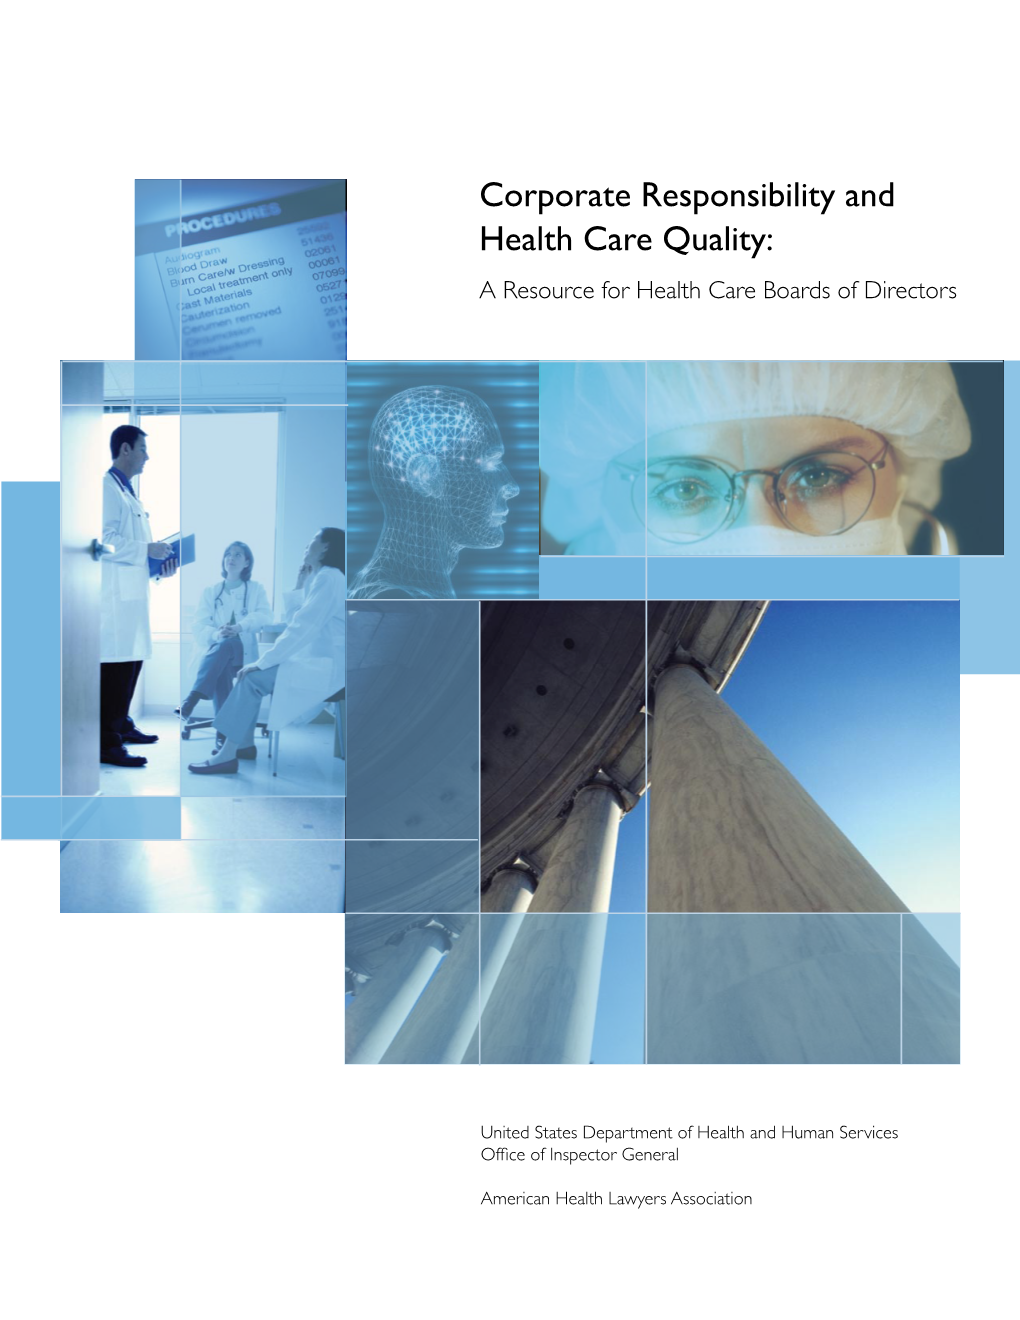 Corporate Responsibility and Health Care Quality: a Resource for Health Care Boards of Directors